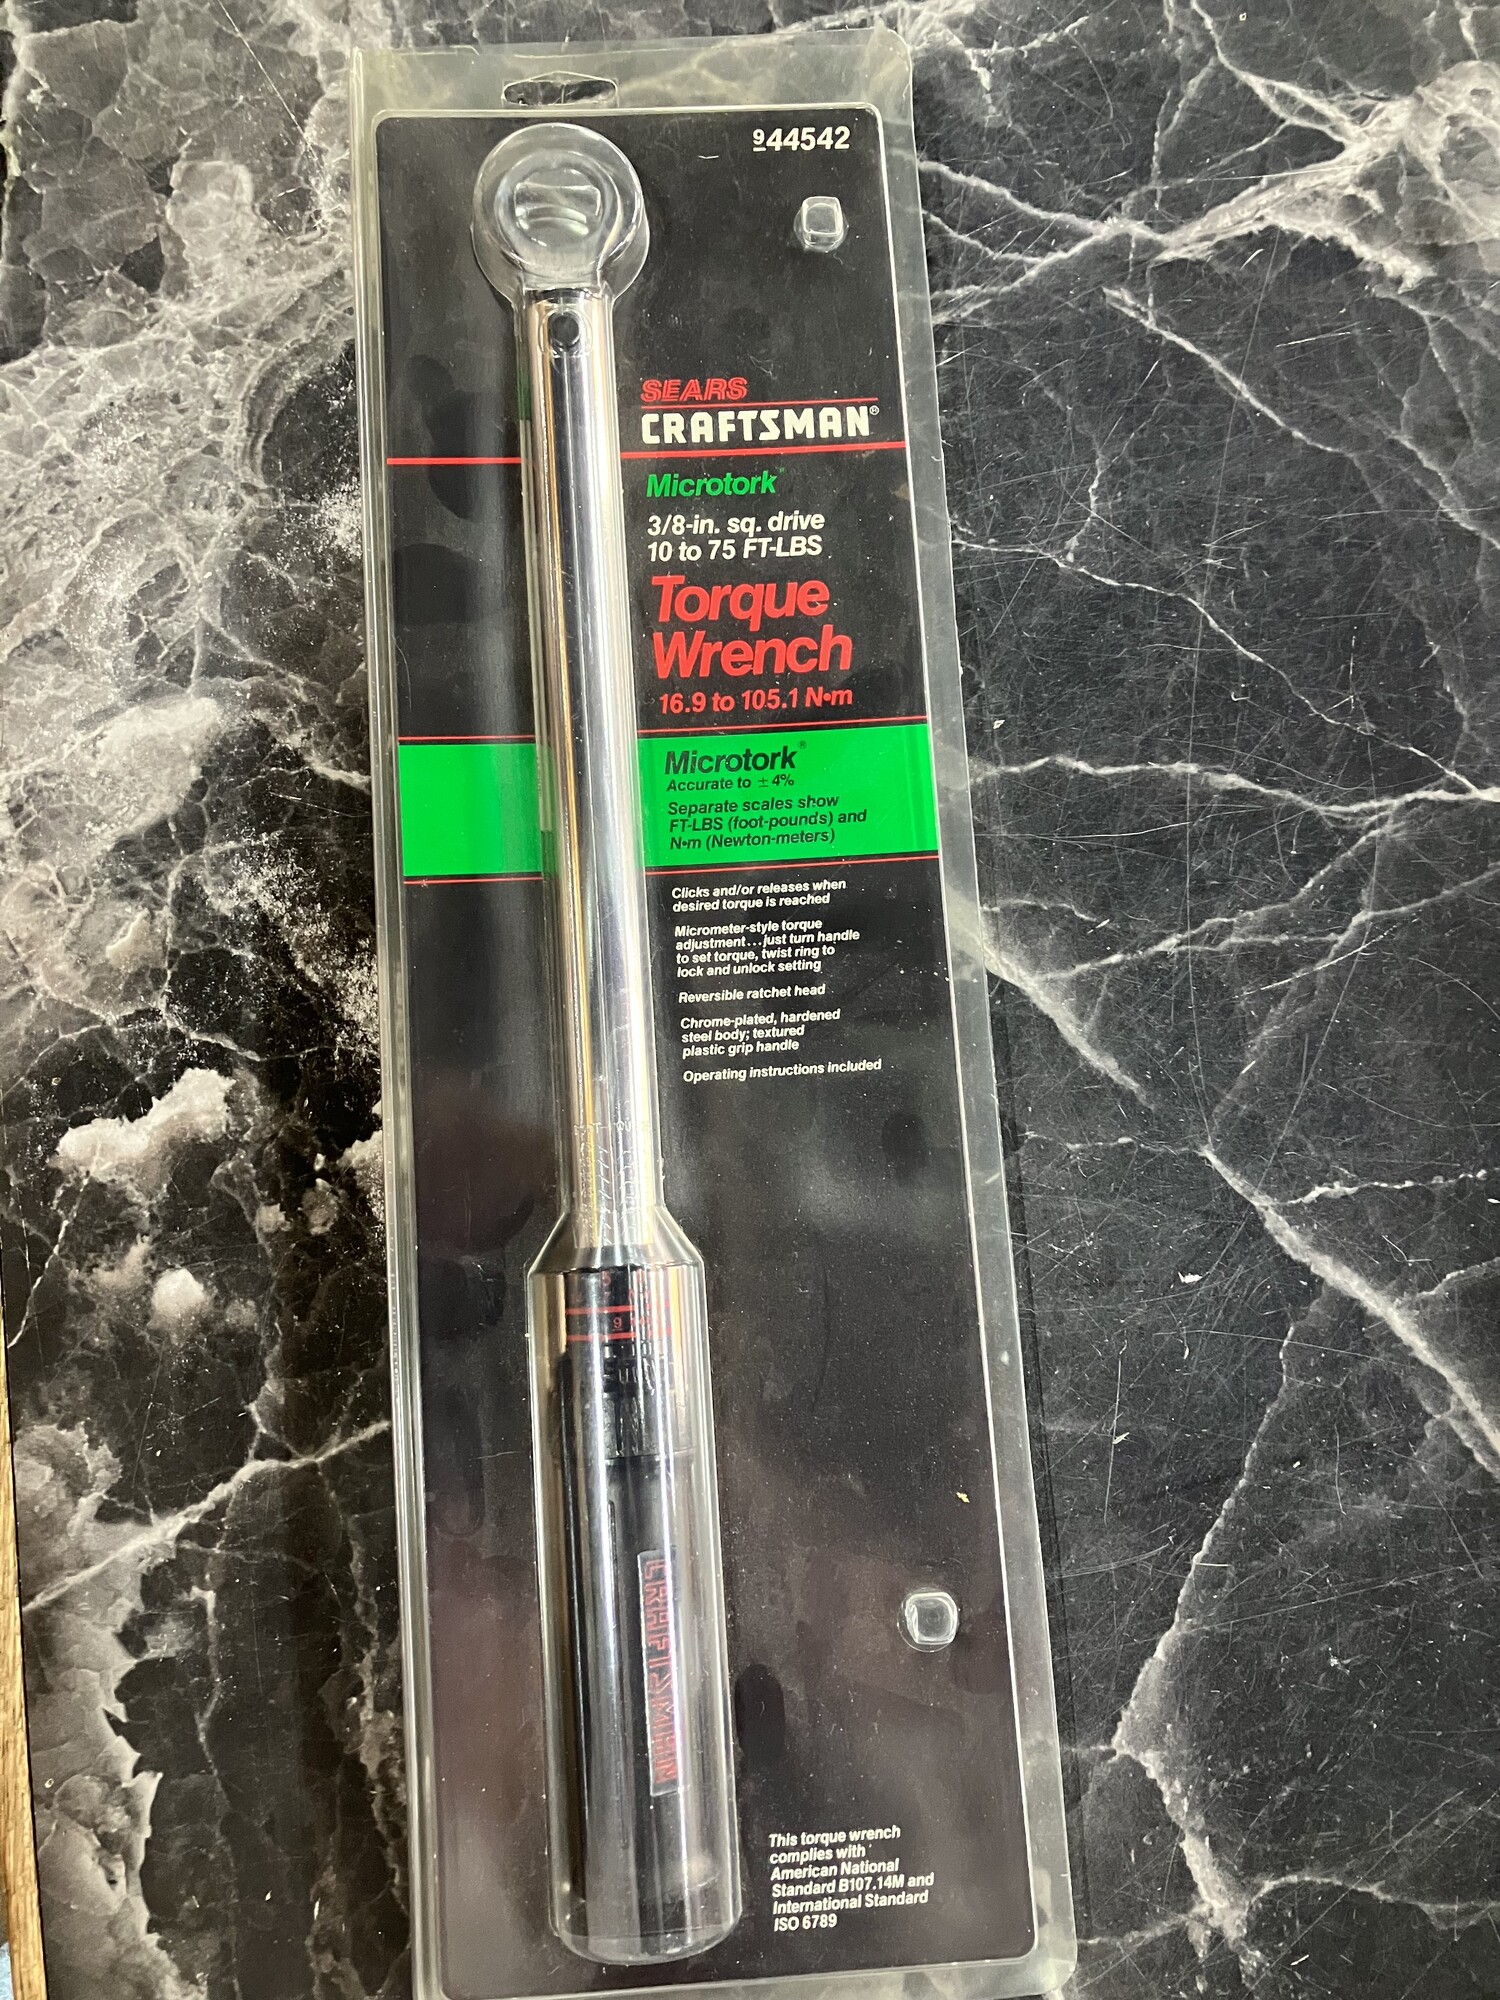 Torque Wrench, Size:3/8 dr Craftsman
10-75ft lbs